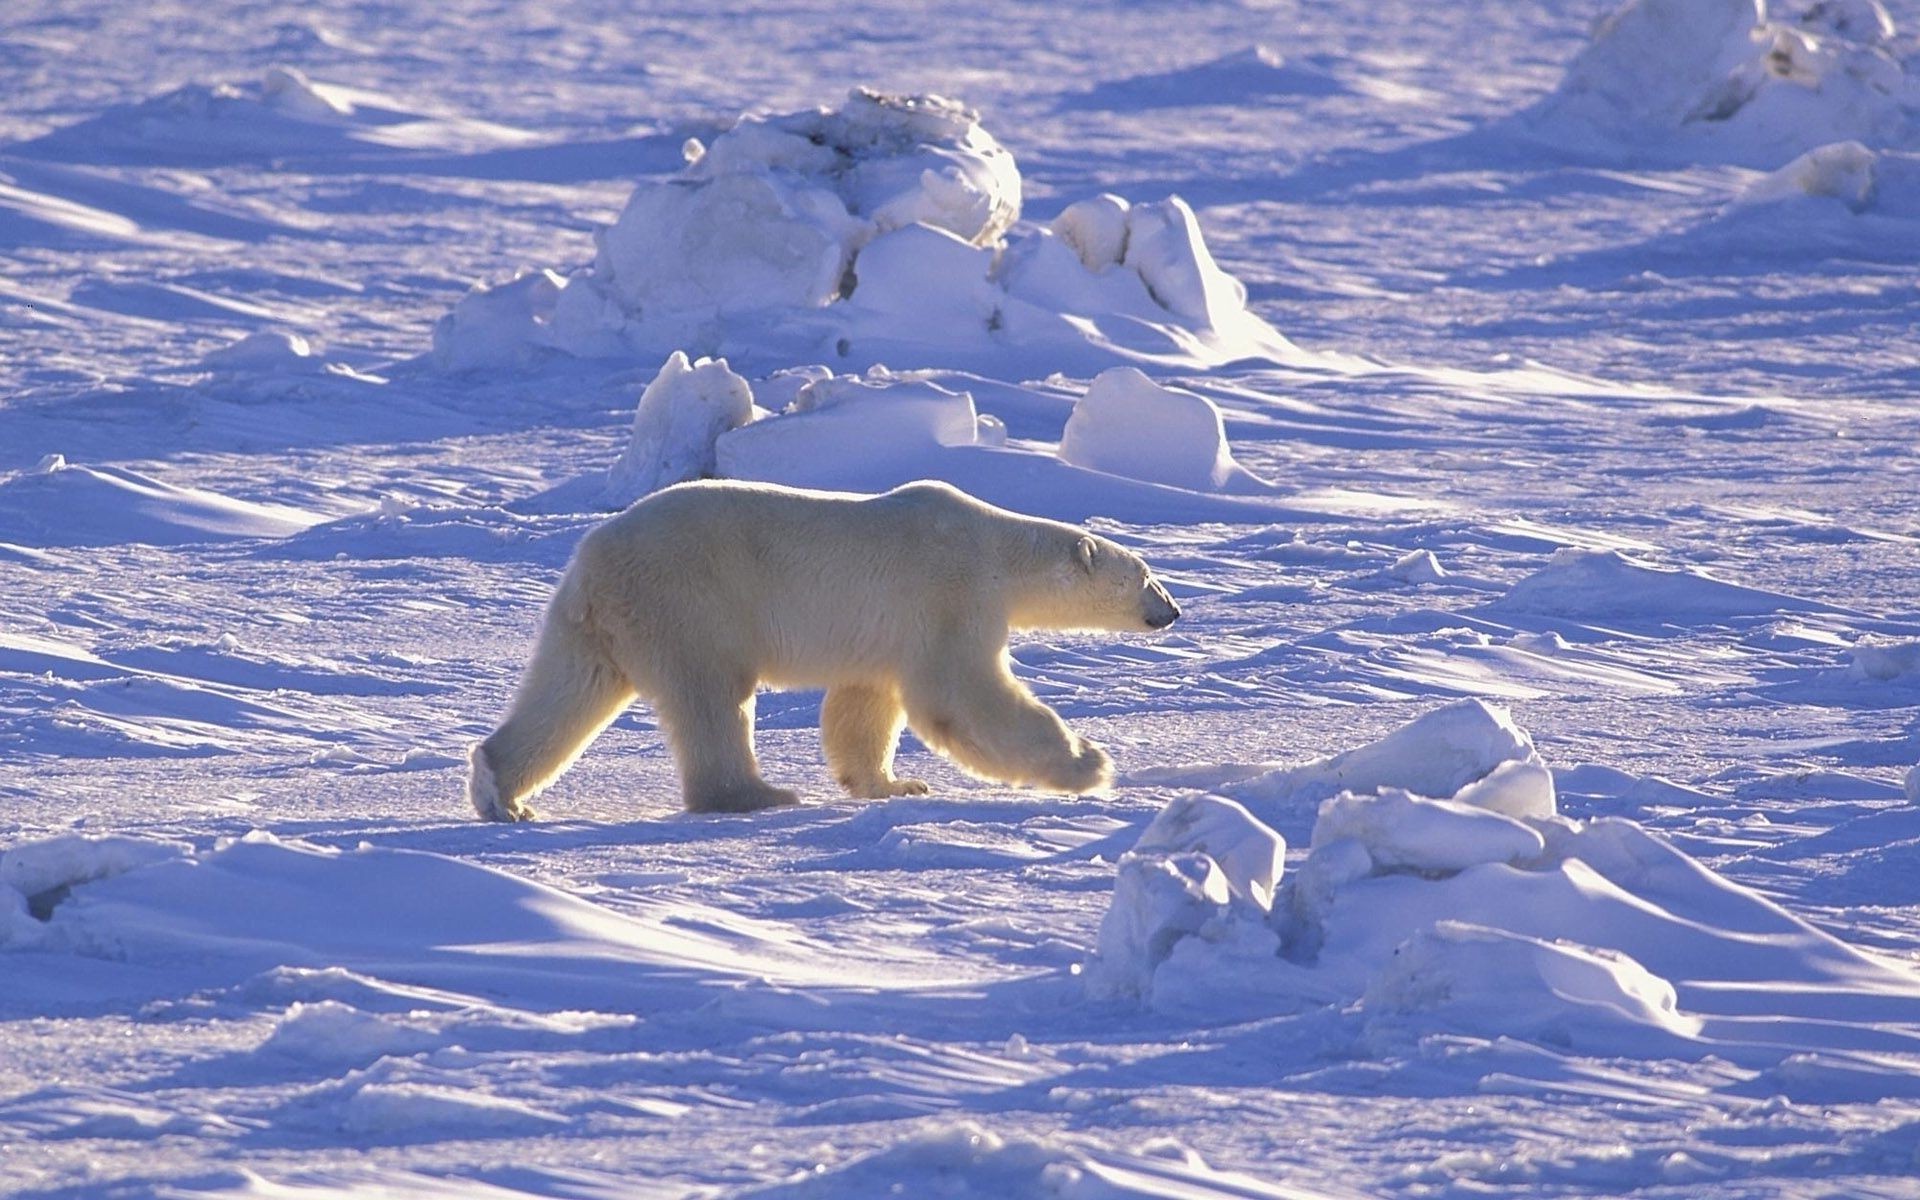 bears snow winter frosty ice cold polar frozen frost nature outdoors water mammal landscape wildlife